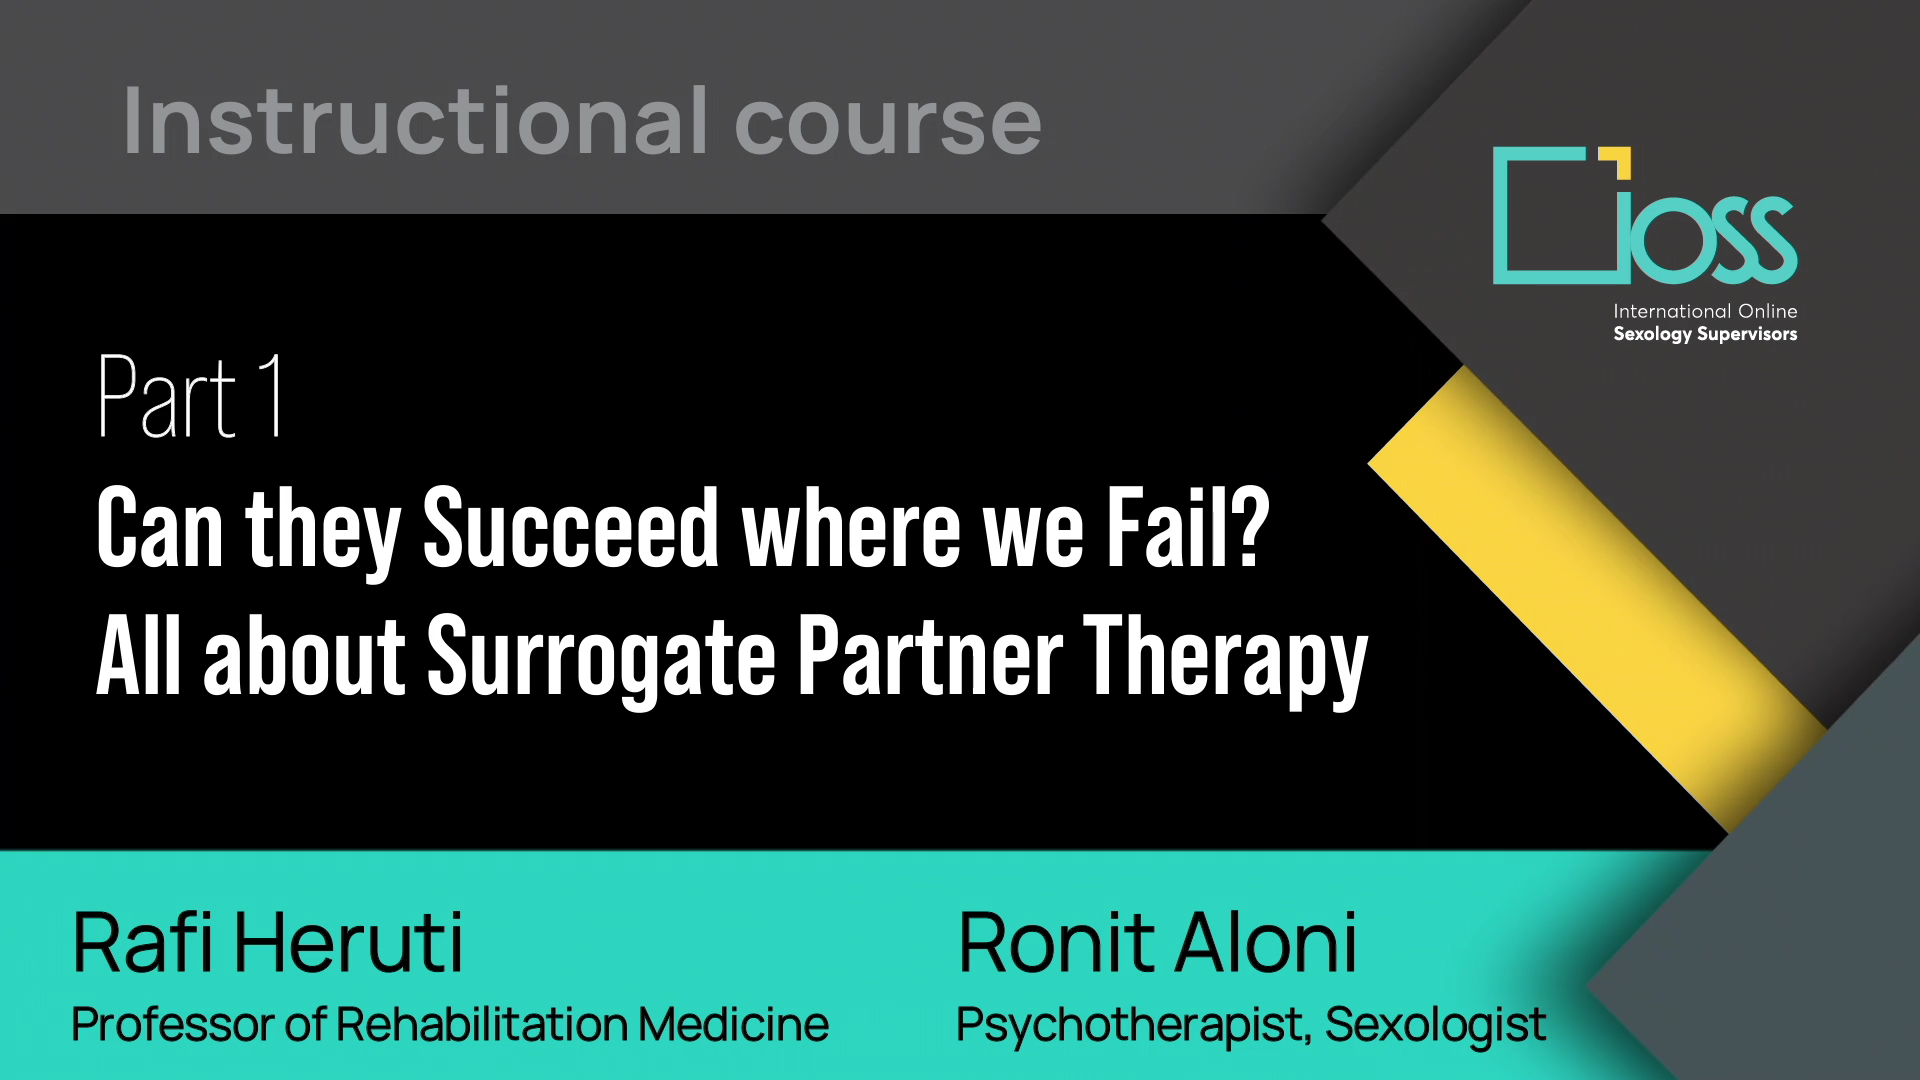 Part 1 Can they Succeed where we Fail: All about Surrogate Partner Therapy (Part 1 & 2)